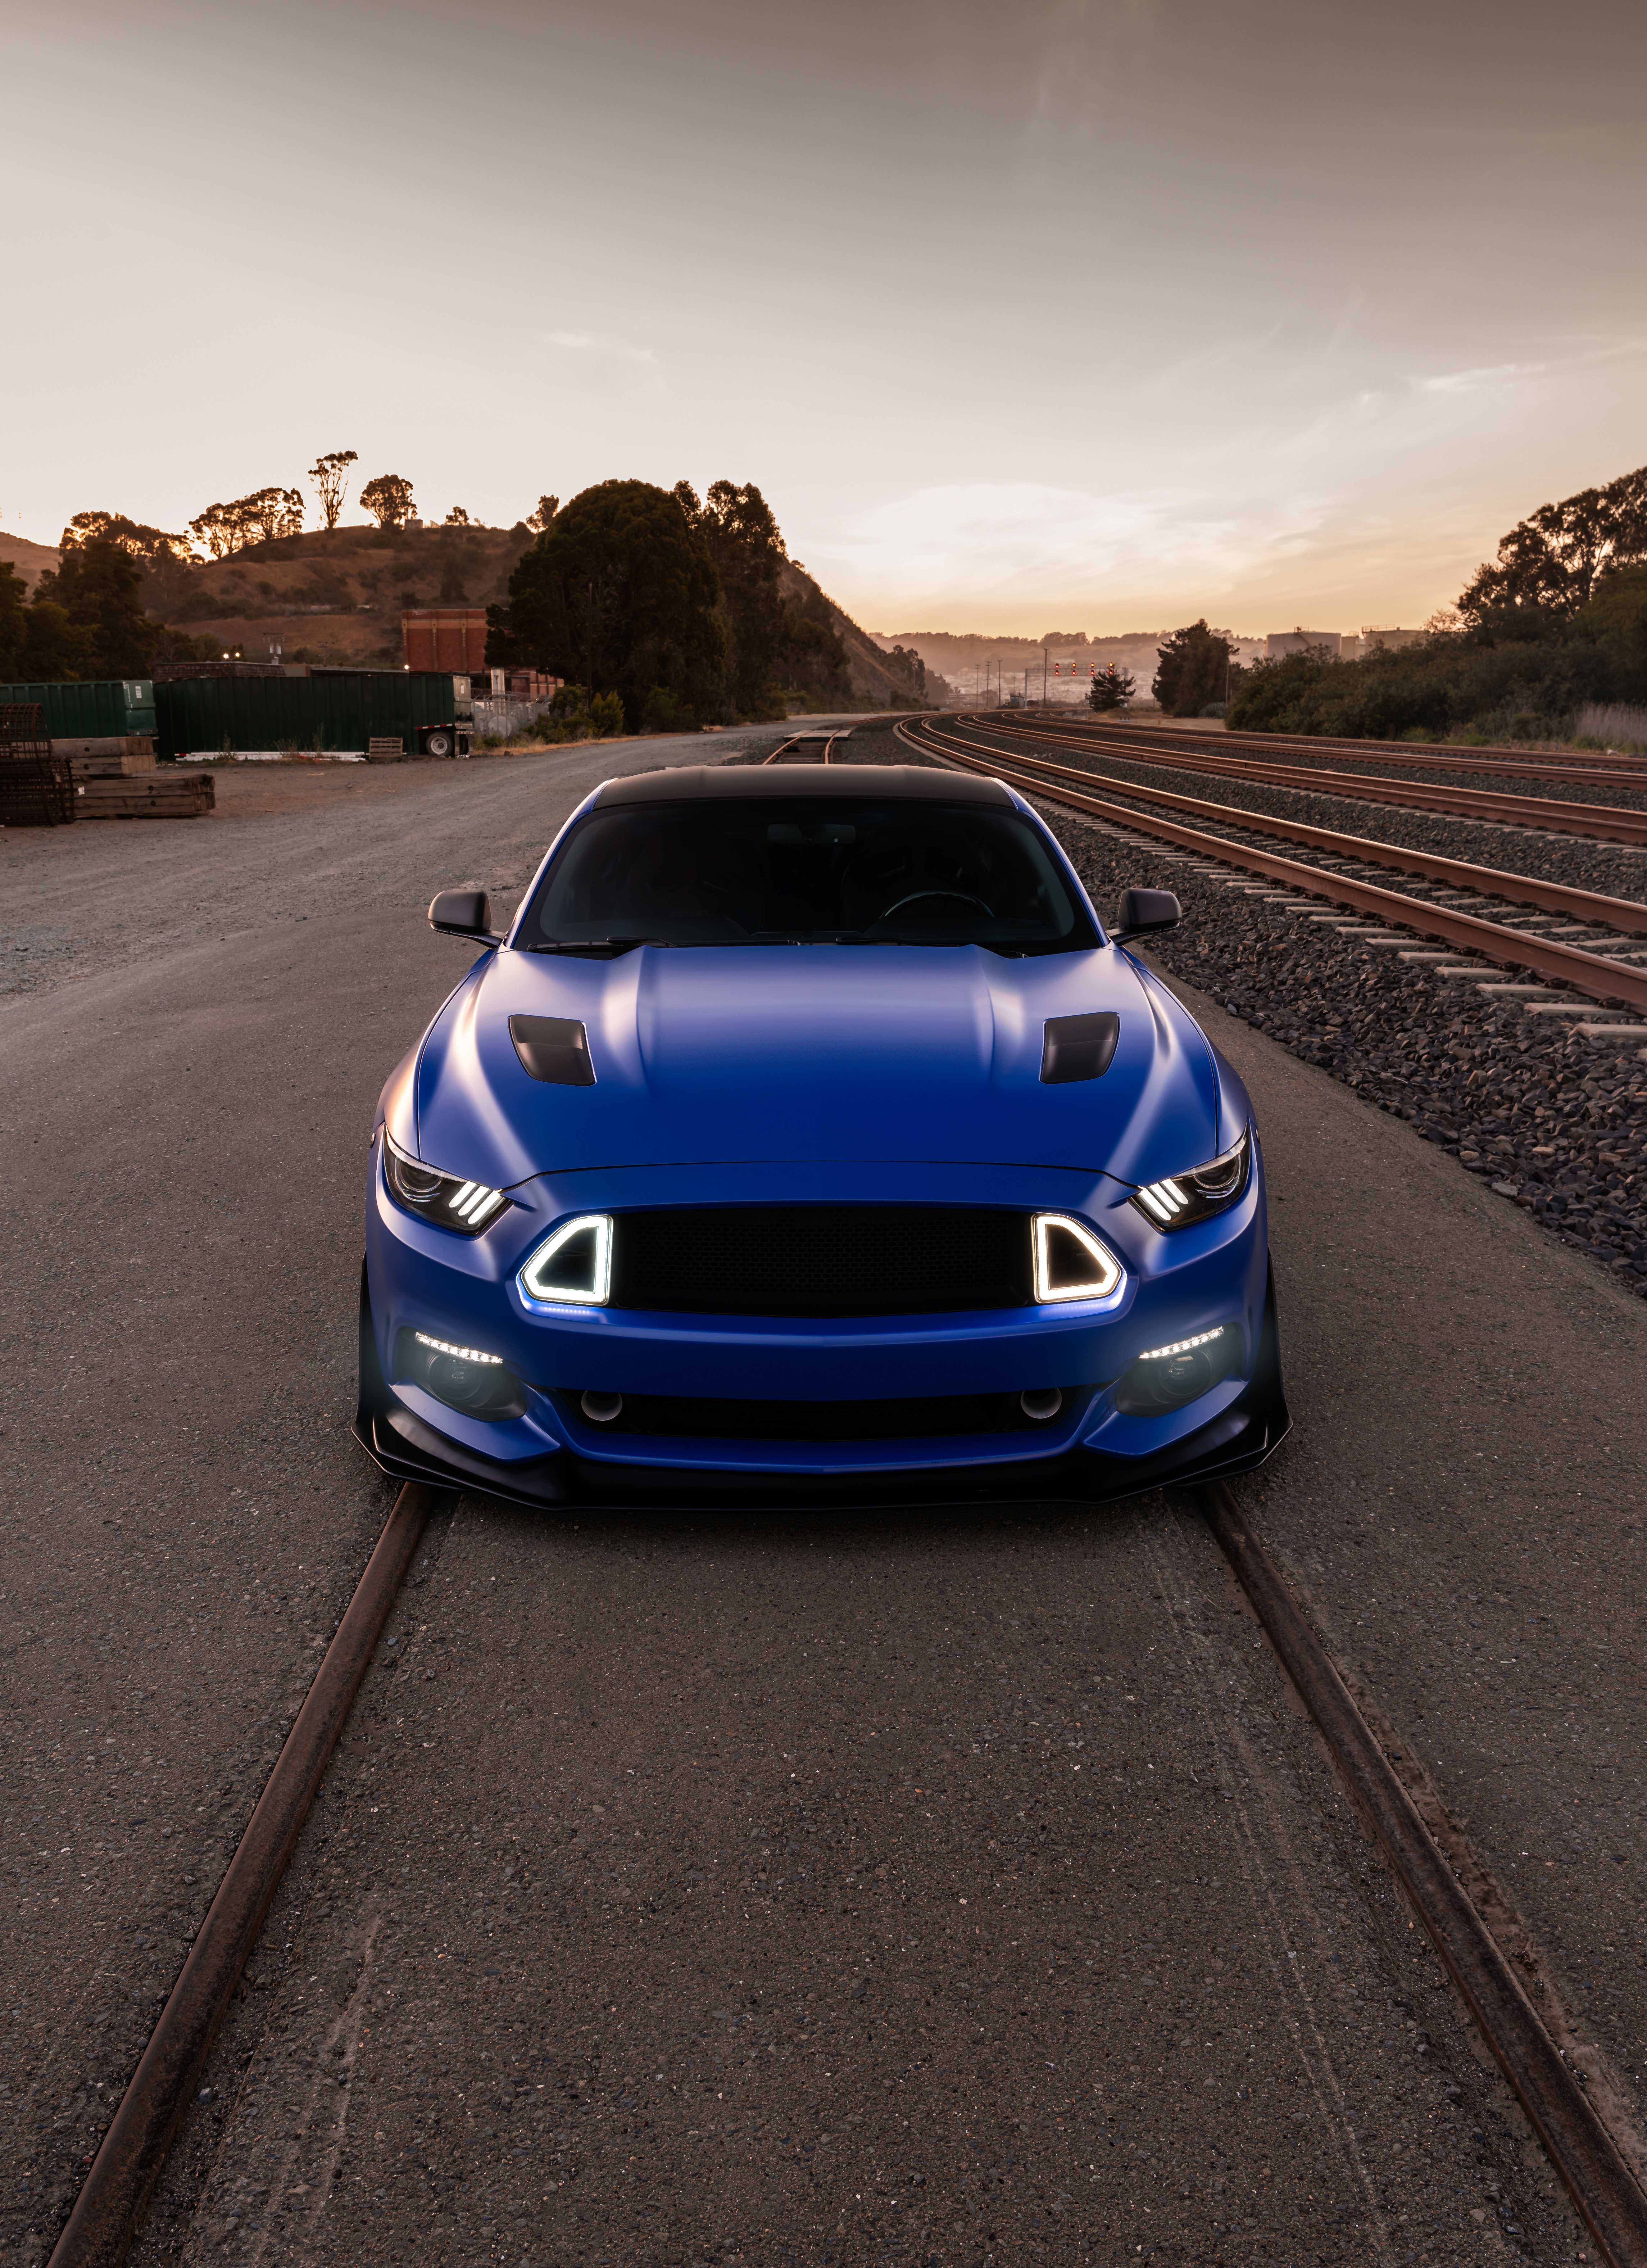 HD wallpaper, Muscle Sports Cars, Ford Mustang Gt, 5K